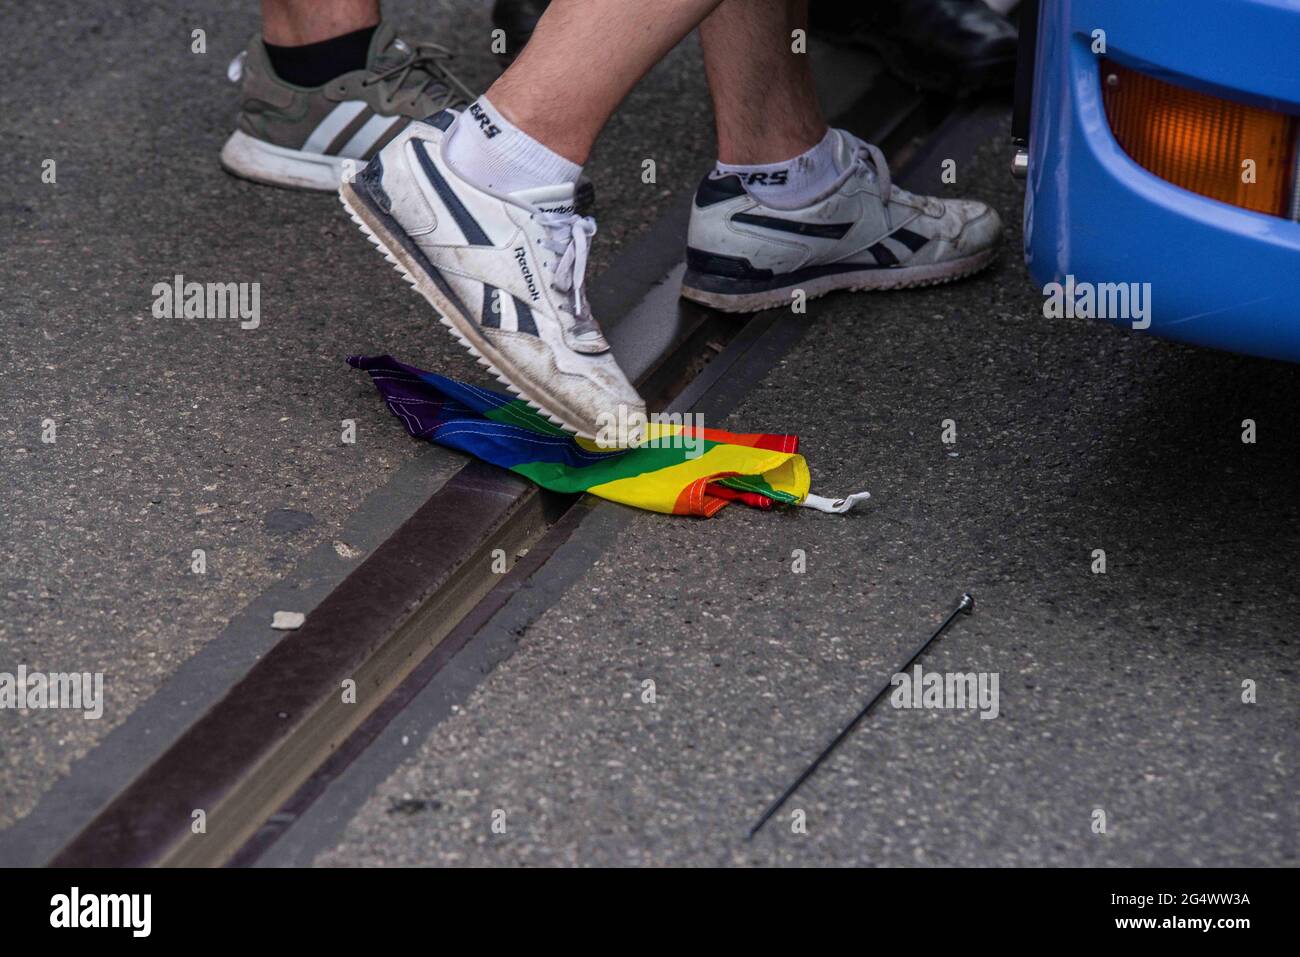 Munich, Bavaria, Germany. 23rd June, 2021. Hungarian fascists in Munich,  Germany step on a rainbow flag. The ultra-nationalist, neonazi hooligan  group ''Carpathian Brigade''Â mobilized in Munich on the day of the European